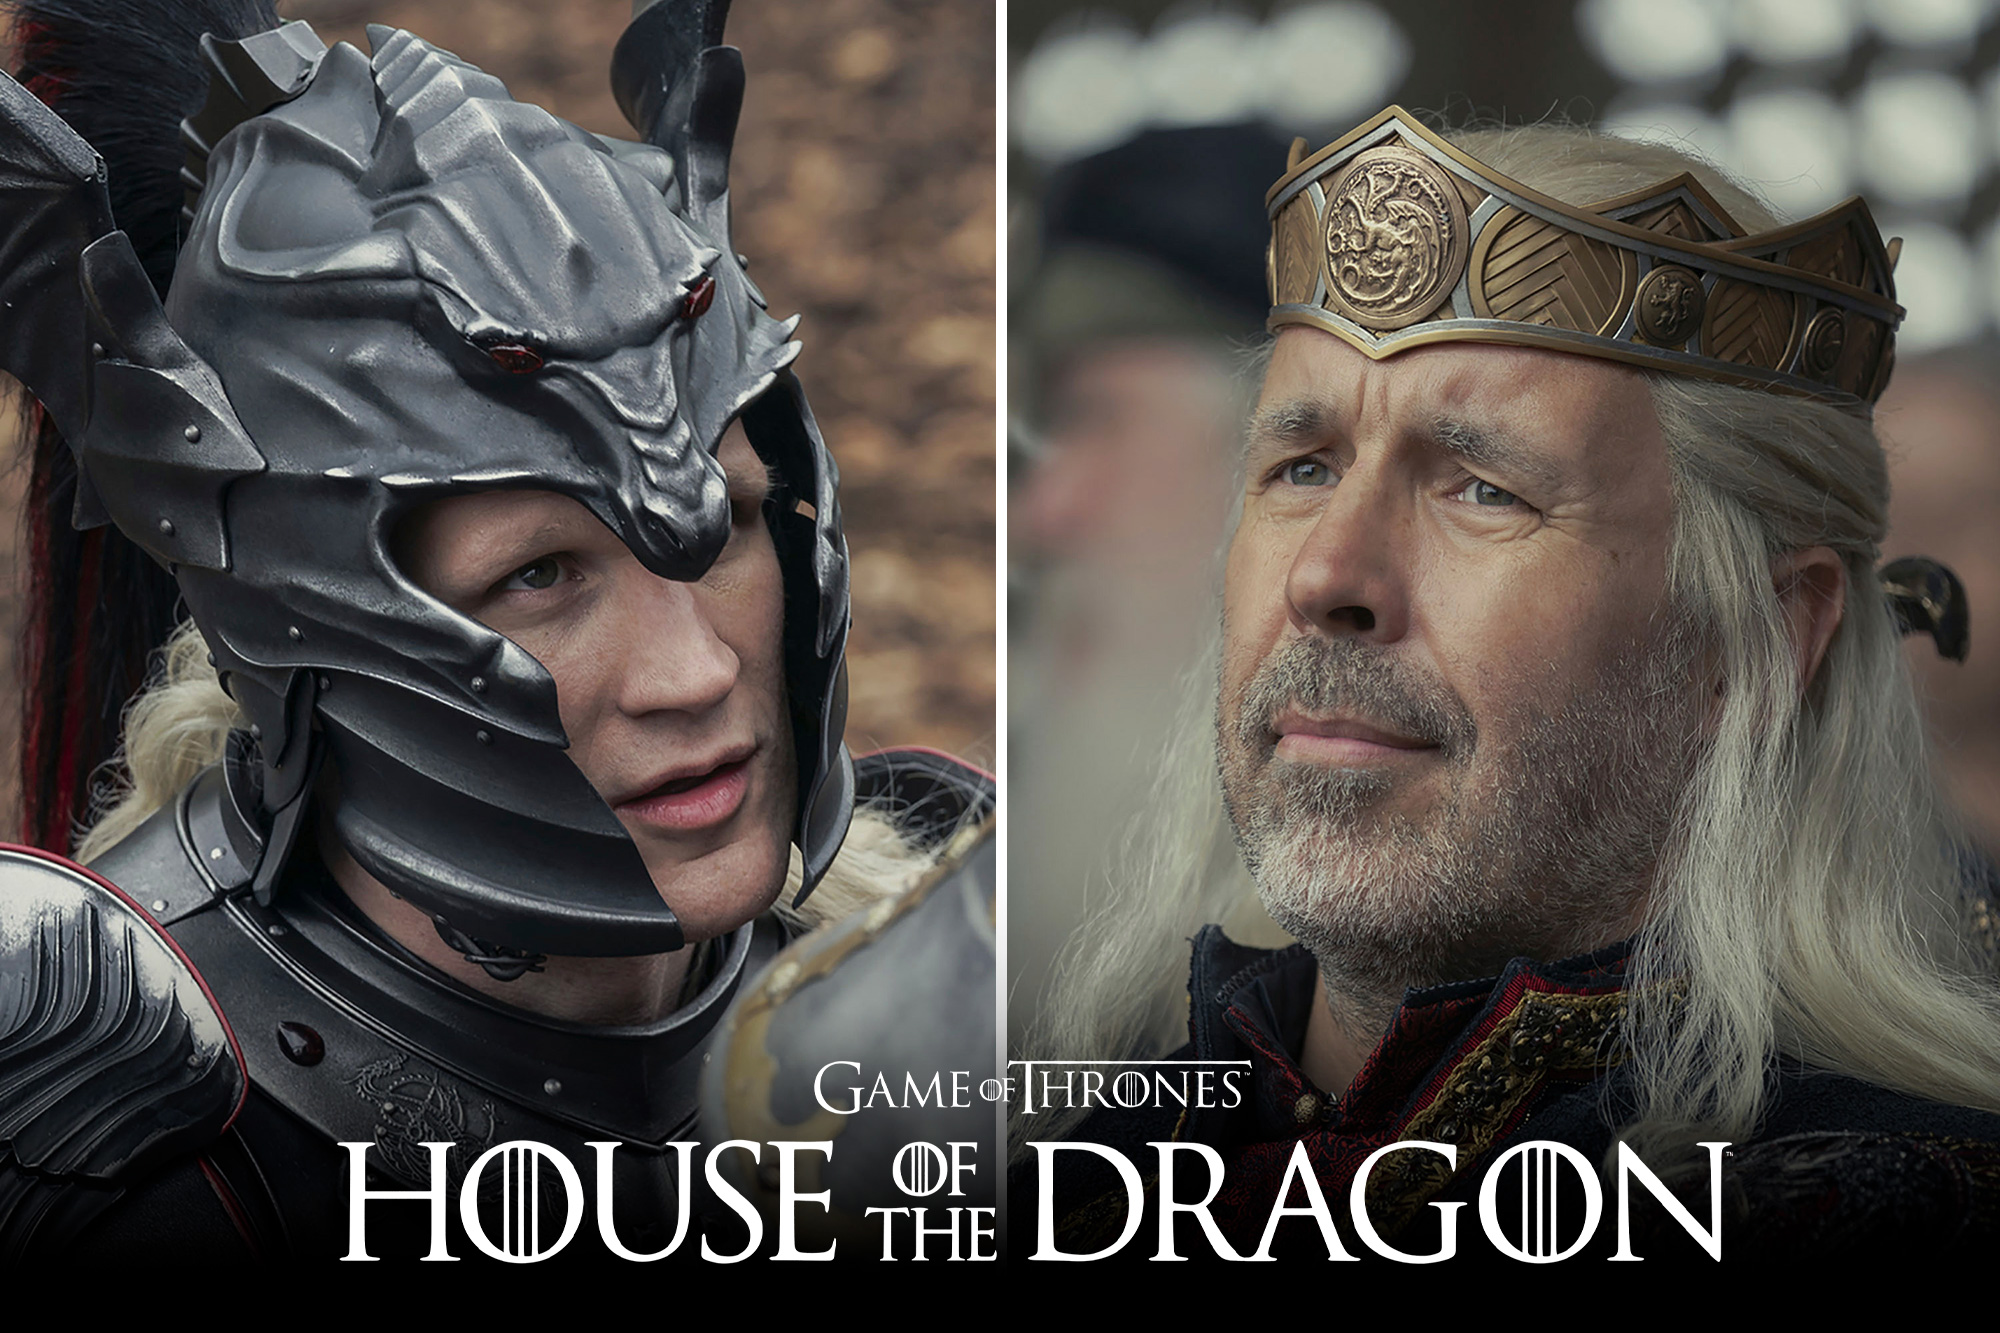 This combination of images released by HBO Max shows Matt Smith as Daemon Targaryen, left, and Prince Paddy Considine as King Viserys Targaryen in scenes from "House of the Dragon,